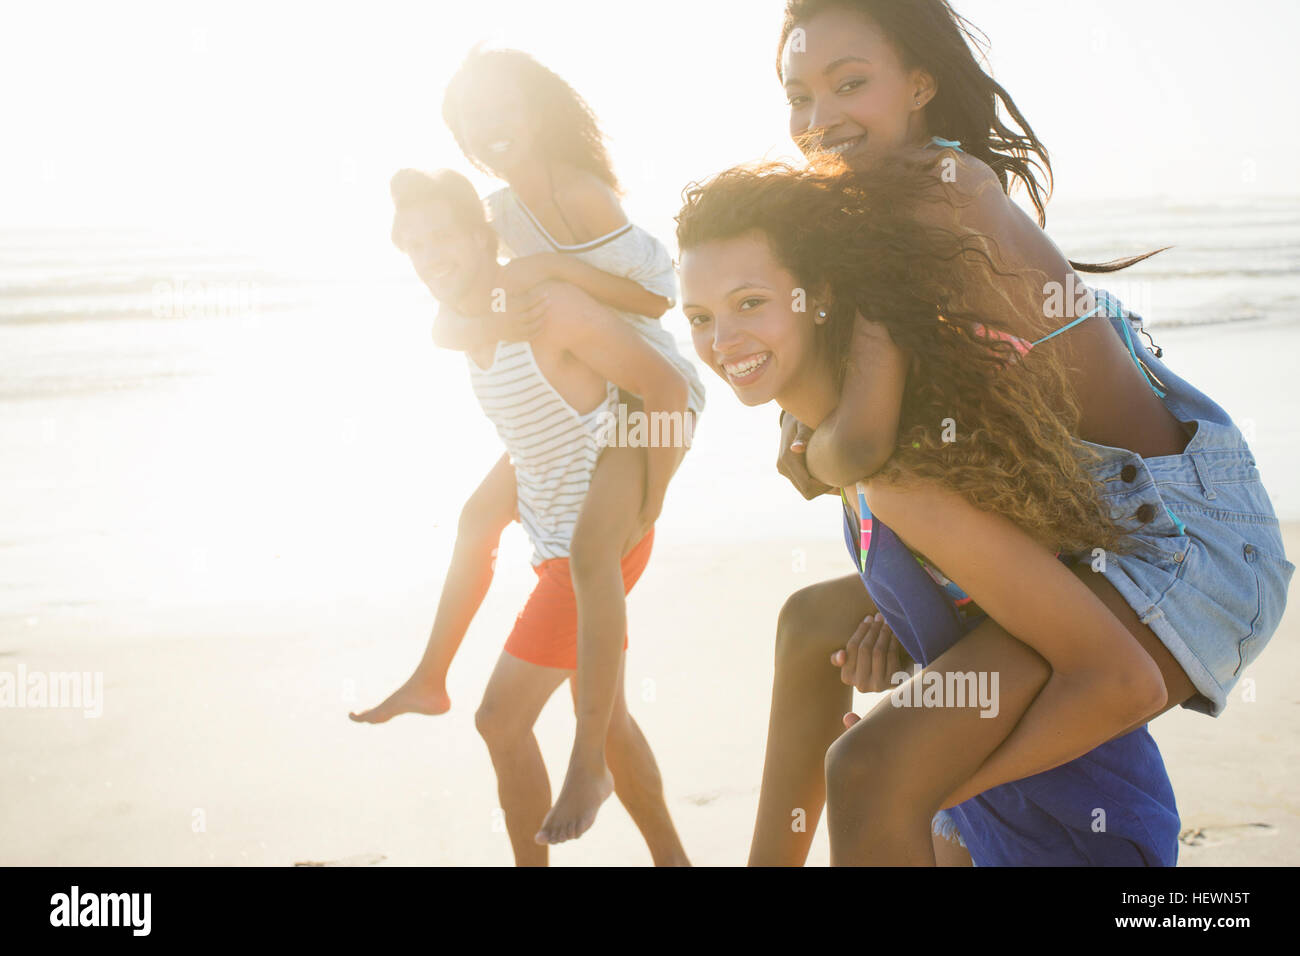 Young man and woman piggybacking friends in beach race, Cape Town, South Africa Stock Photo